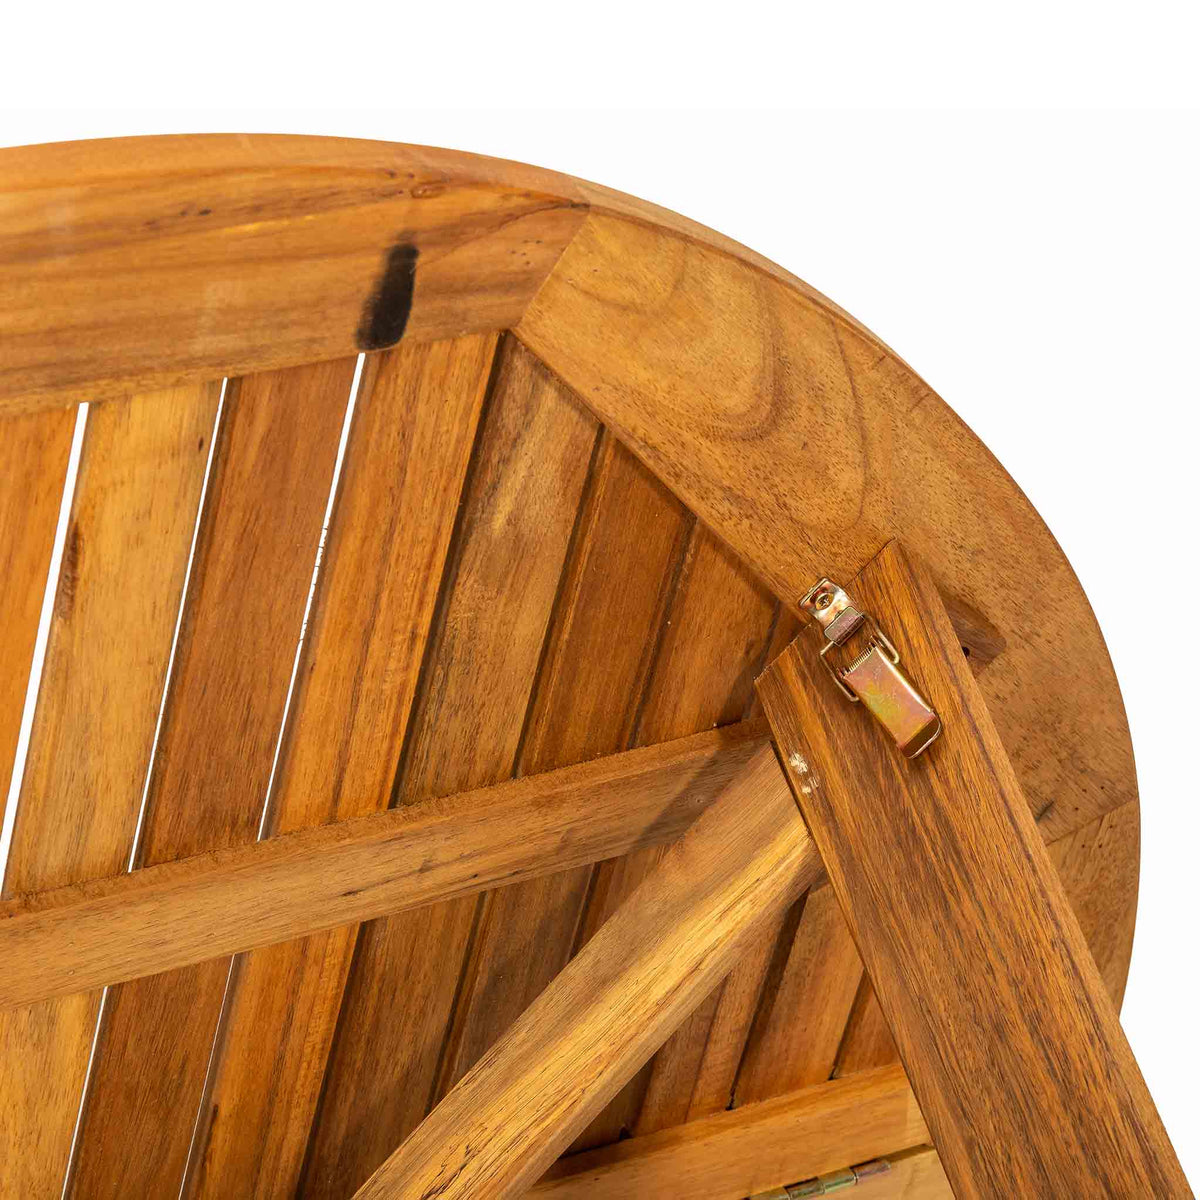 Acacia 120cm Round Gateleg Garden Table - Close up of underside of table